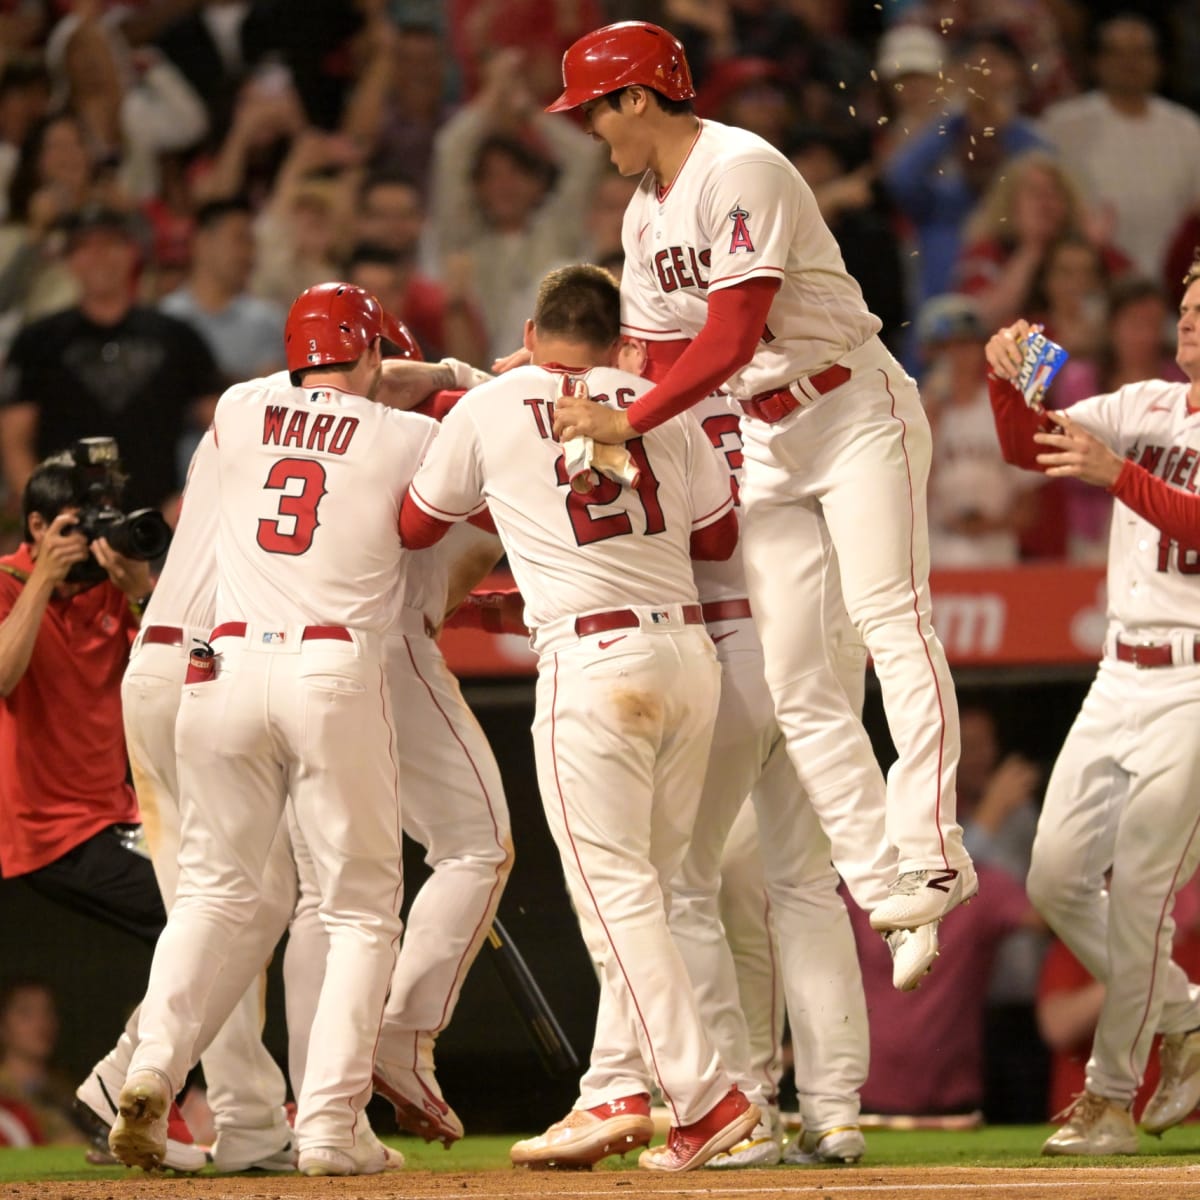 Los Angeles Angels Exclusive Club in History with Insane Late Win vs. White Sox - Fastball